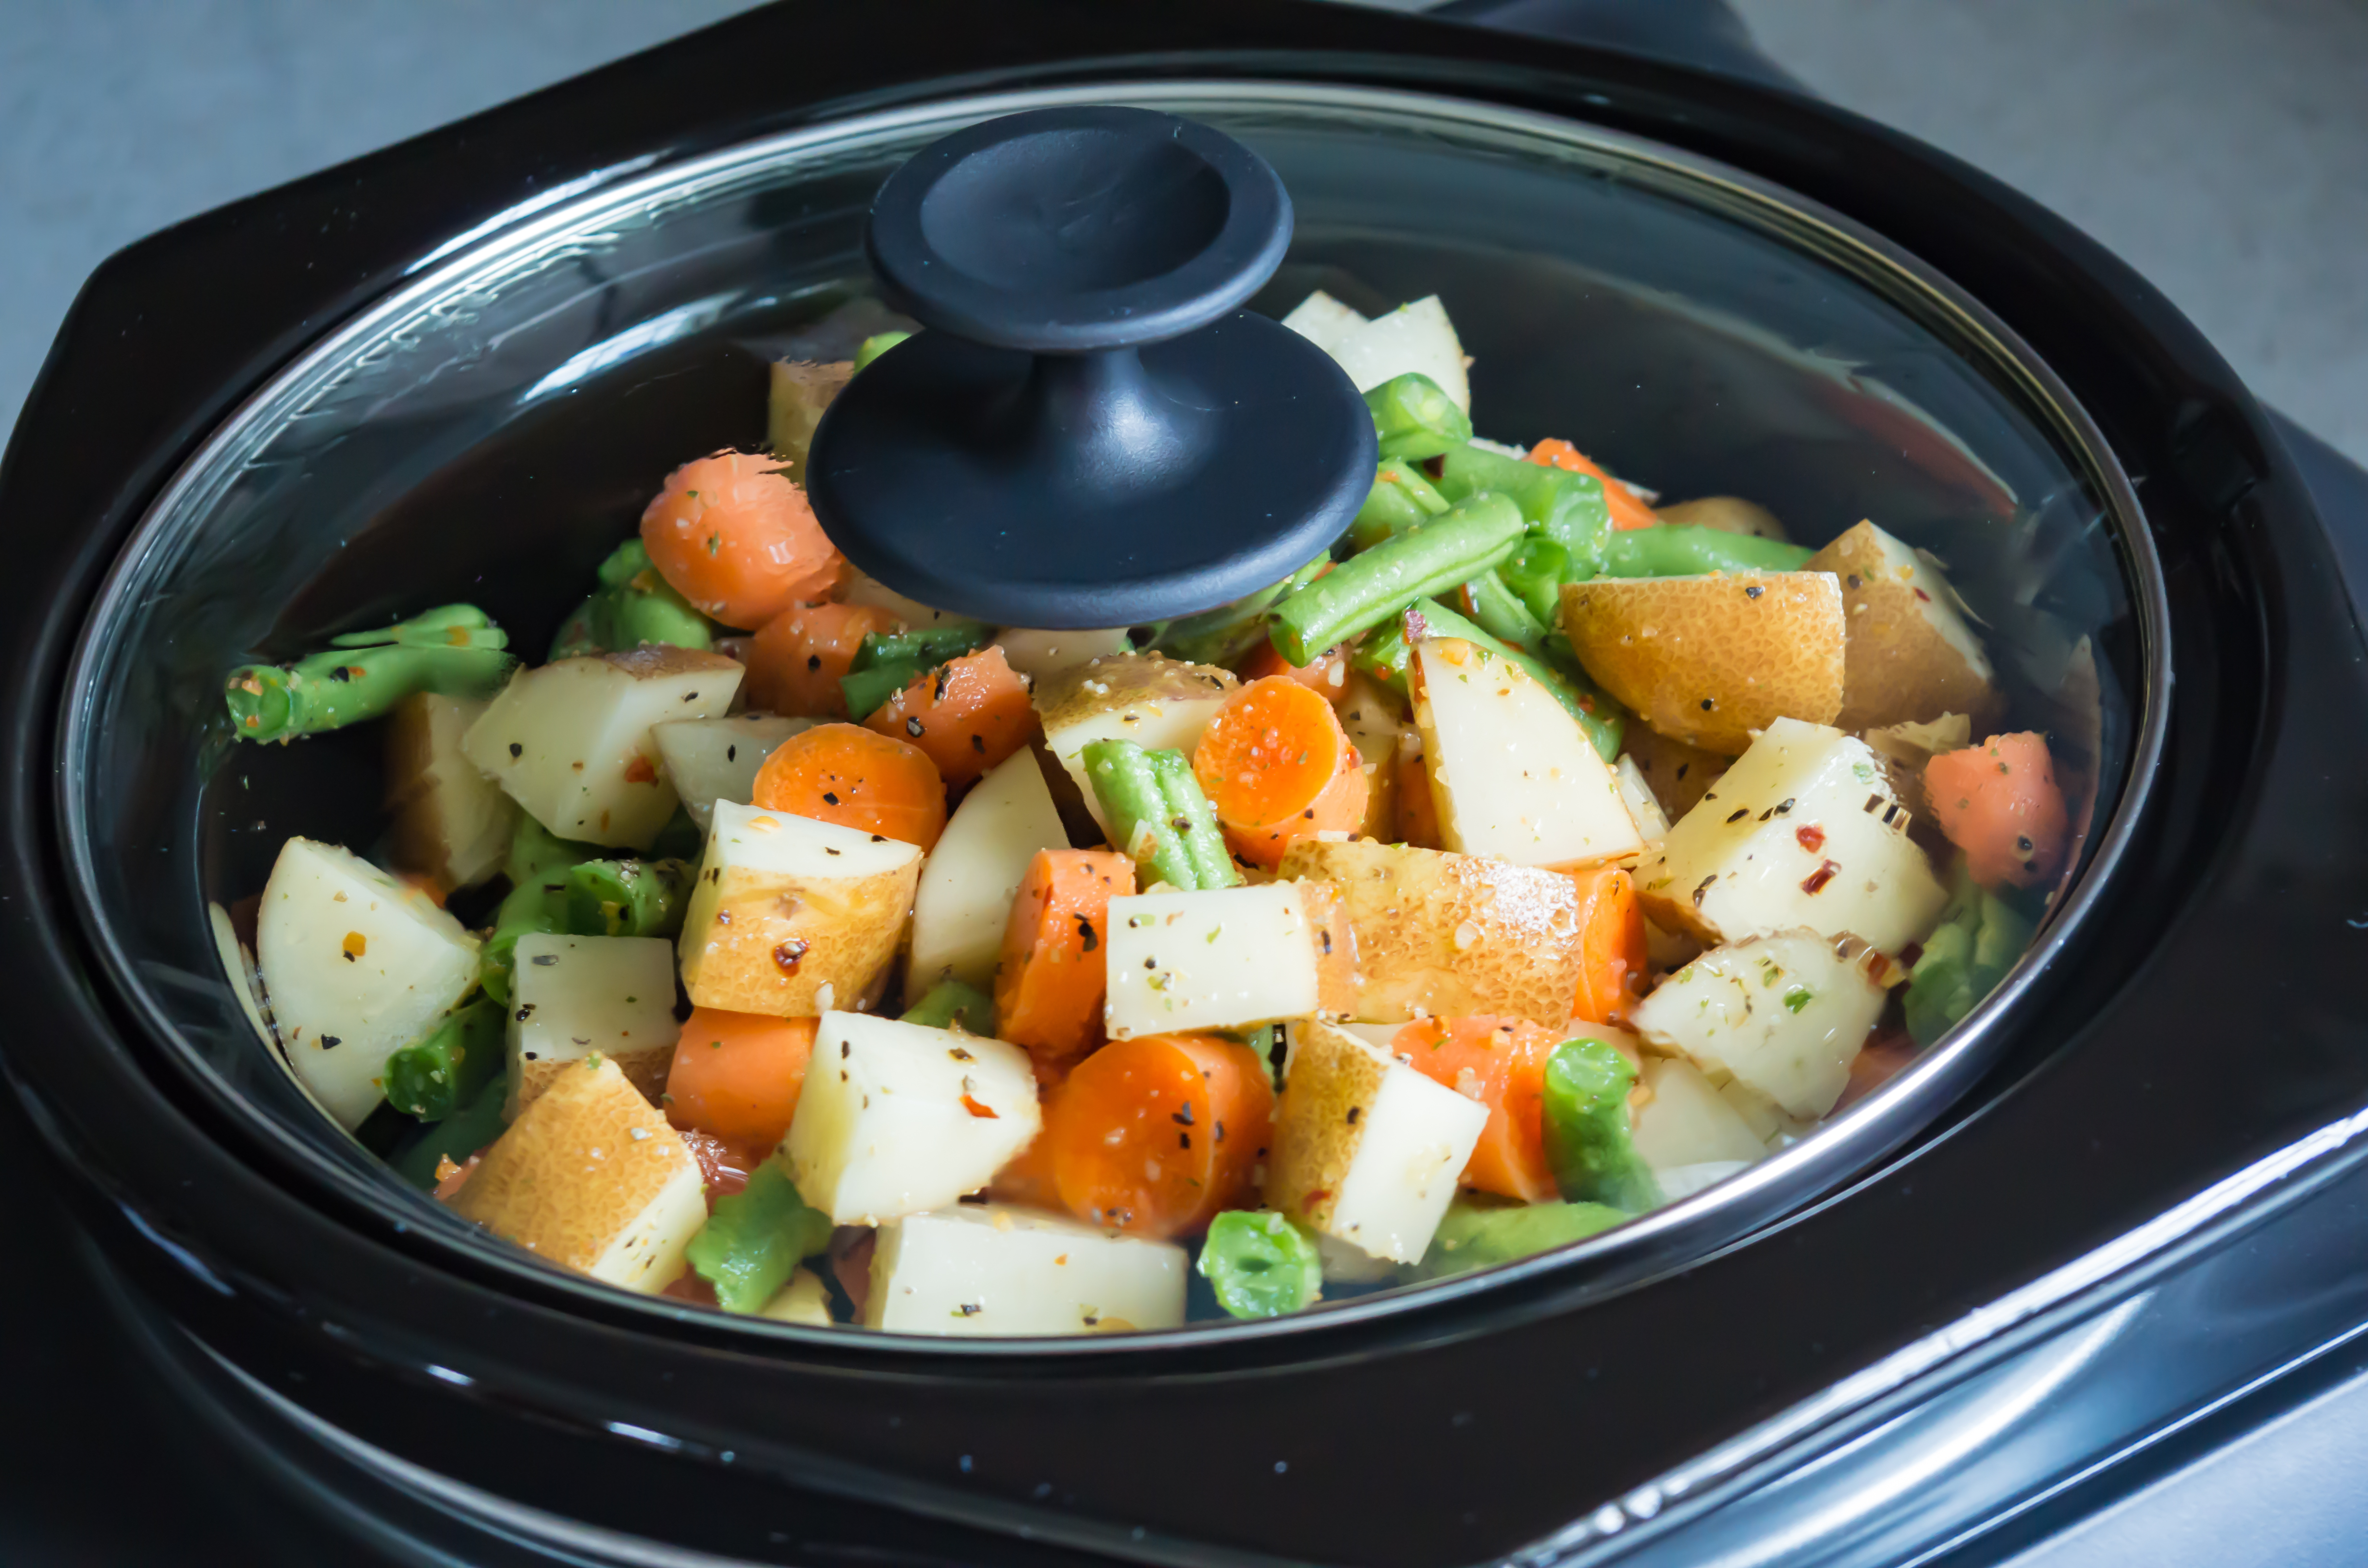 Why You Shouldn't Buy a Slow Cooker